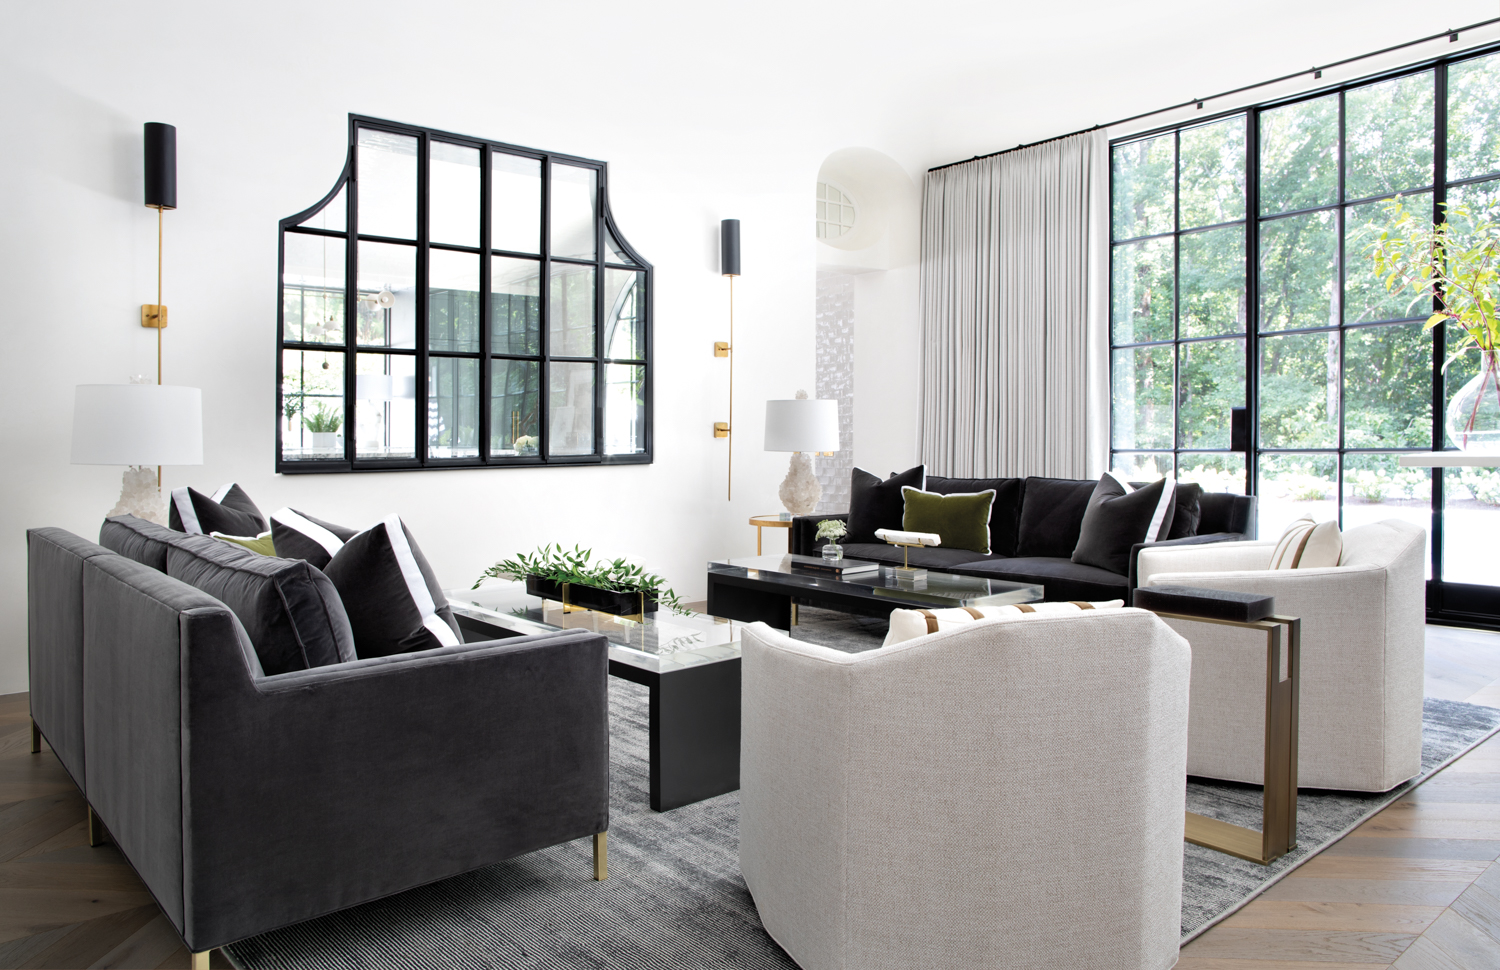 A sunlit living room featuring dark gray sofas, ivory swivel chairs and a large metal window looking into the kitchen